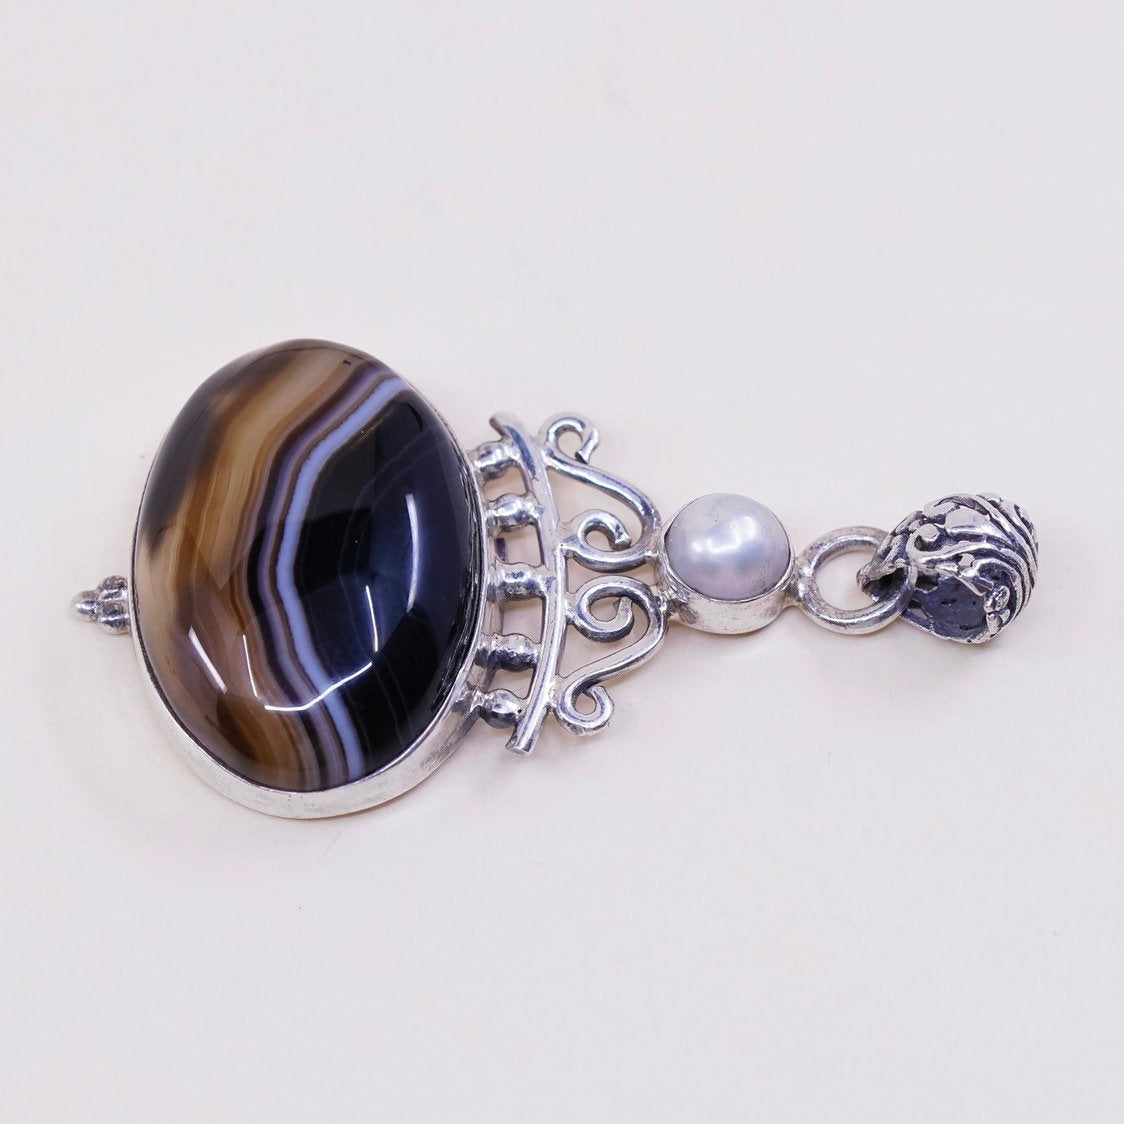 vtg sterling silver handmade pendant, solid 925 with agate and pearl